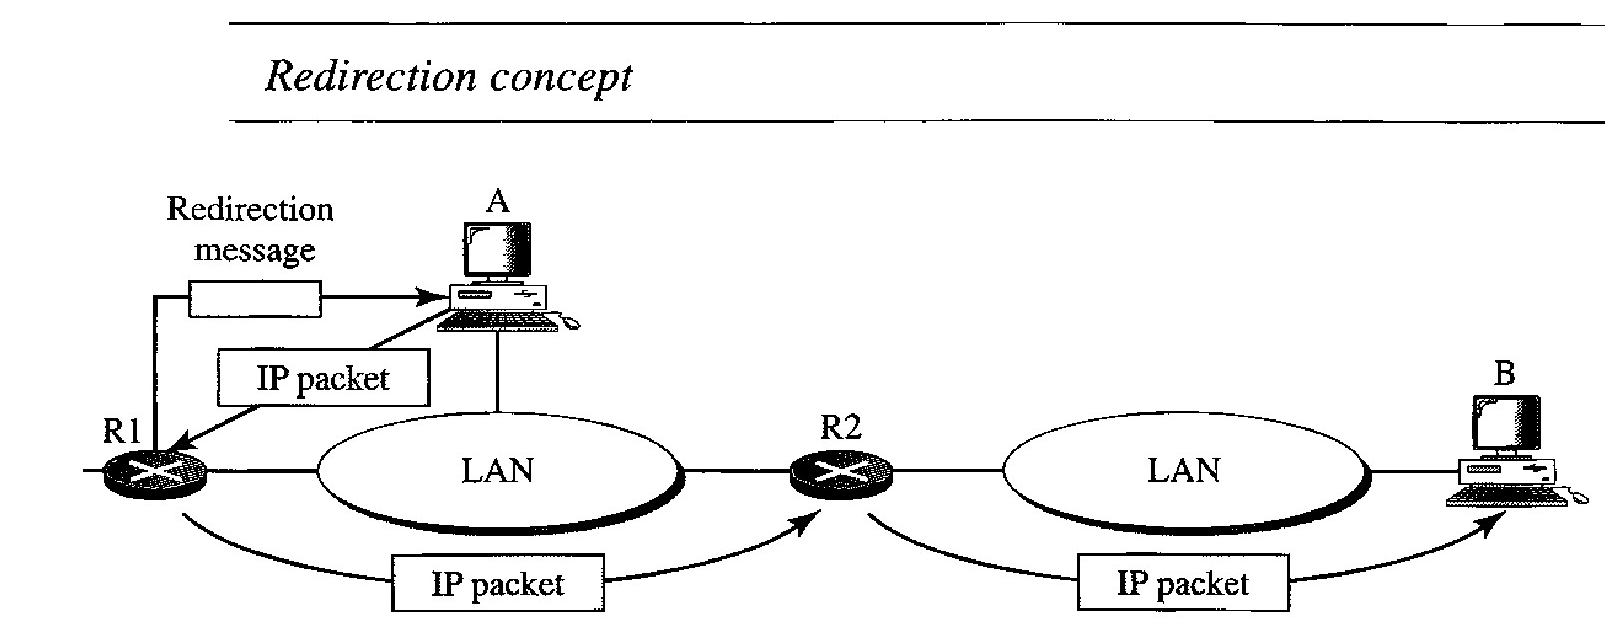 Redirection concept in ICMP